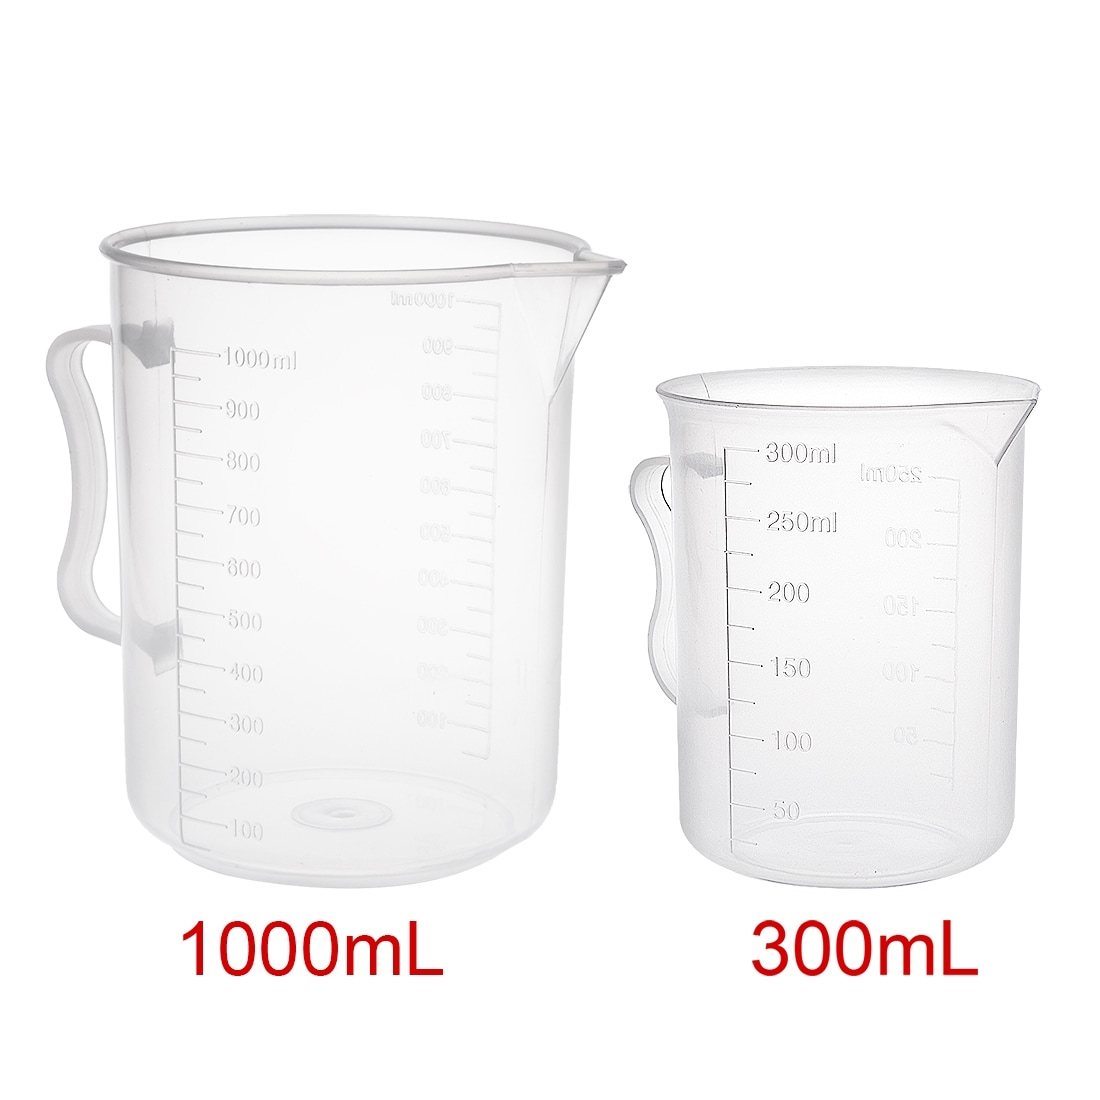 https://ak1.ostkcdn.com/images/products/is/images/direct/d9f02ddc3b54133caf39a2564d663d86c681b6cb/Laboratory-Clear-PP-Plastic-Measuring-Cup-Handled-Beaker-300mL-1000mL-Set-of-3.jpg